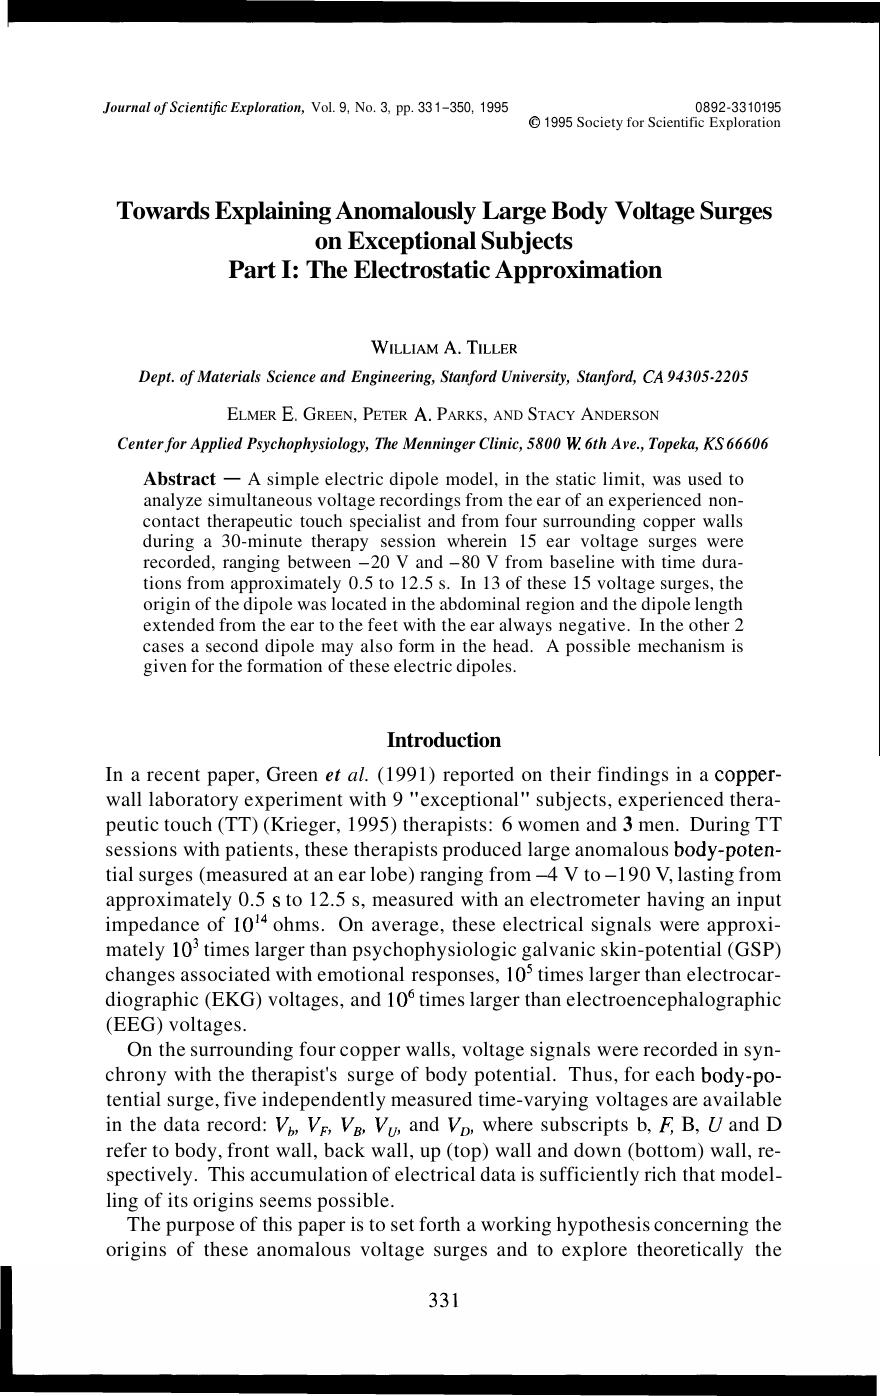 Towards Explaining Anomalously Large Body Voltage Surges on Exceptional Subjects, Part I, The Electrostatic Approximation - Article